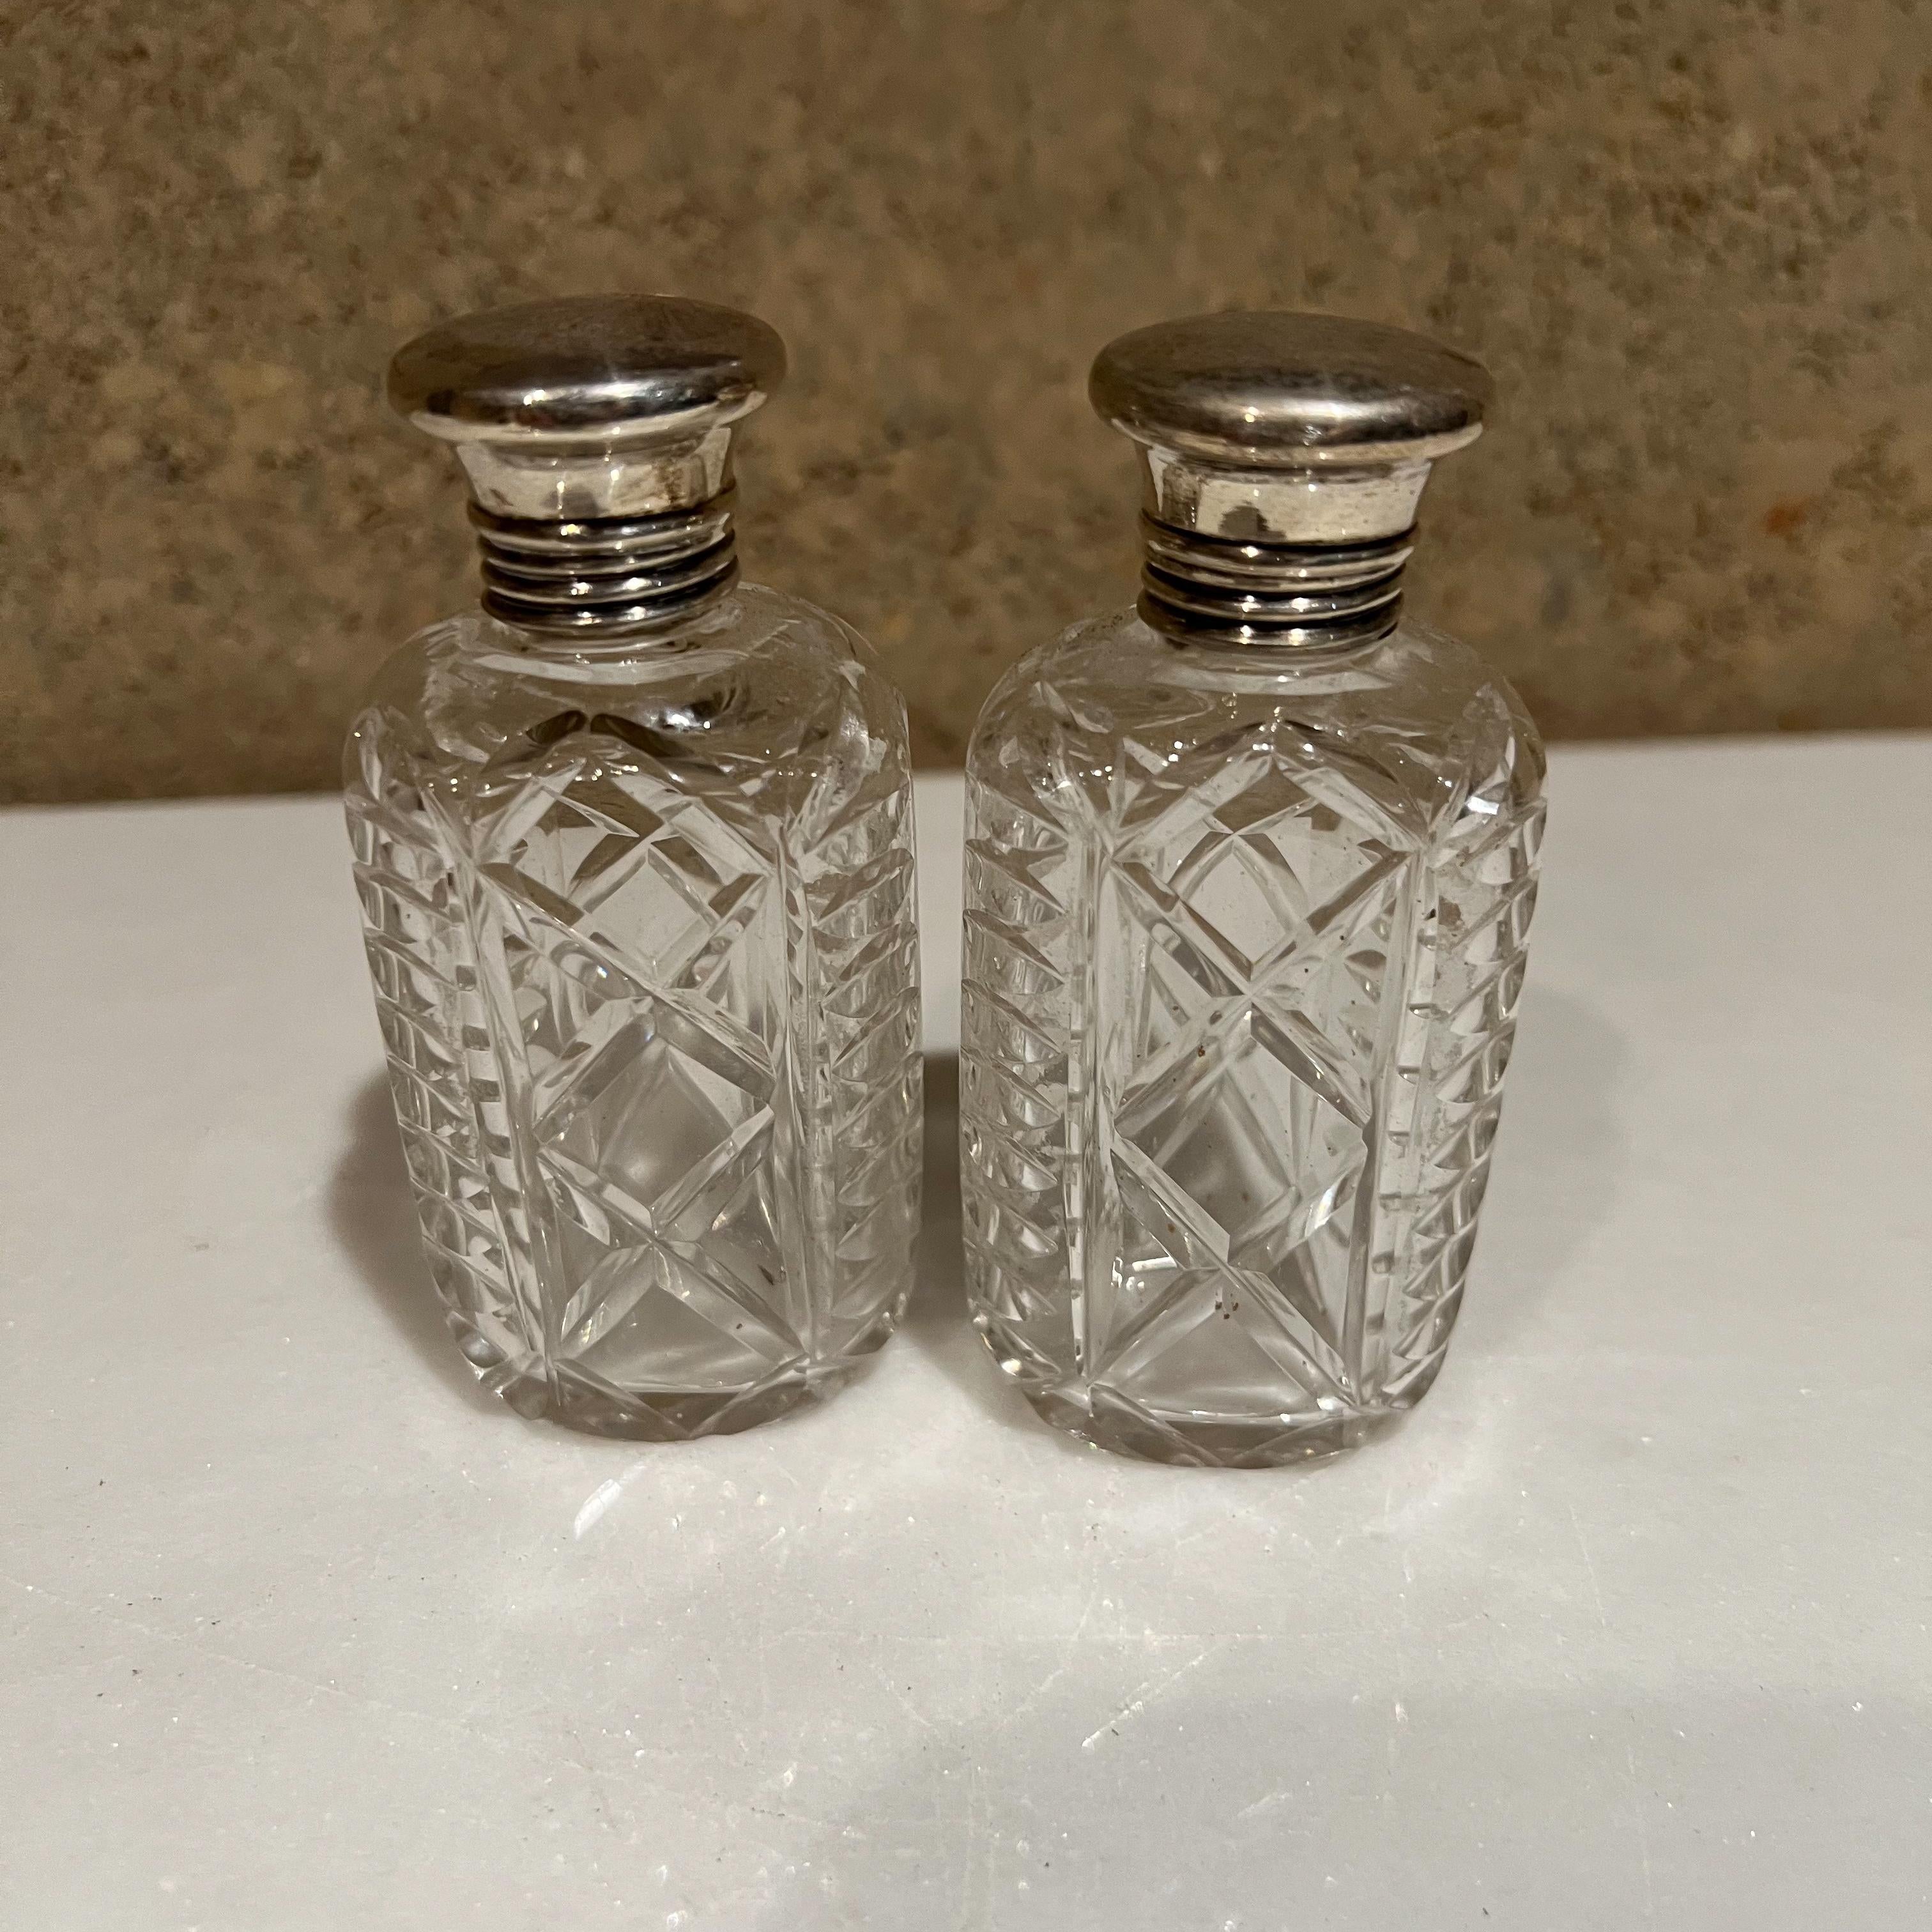 Antique glass jars
1940s Elegant vintage vanity bottle jars in cut-glass with silver-plated bottle caps.
Set of two
Measures: 3.75 tall x 2 width x 1.25
Preowned original unrestored vintage condition.
See images provided.
  